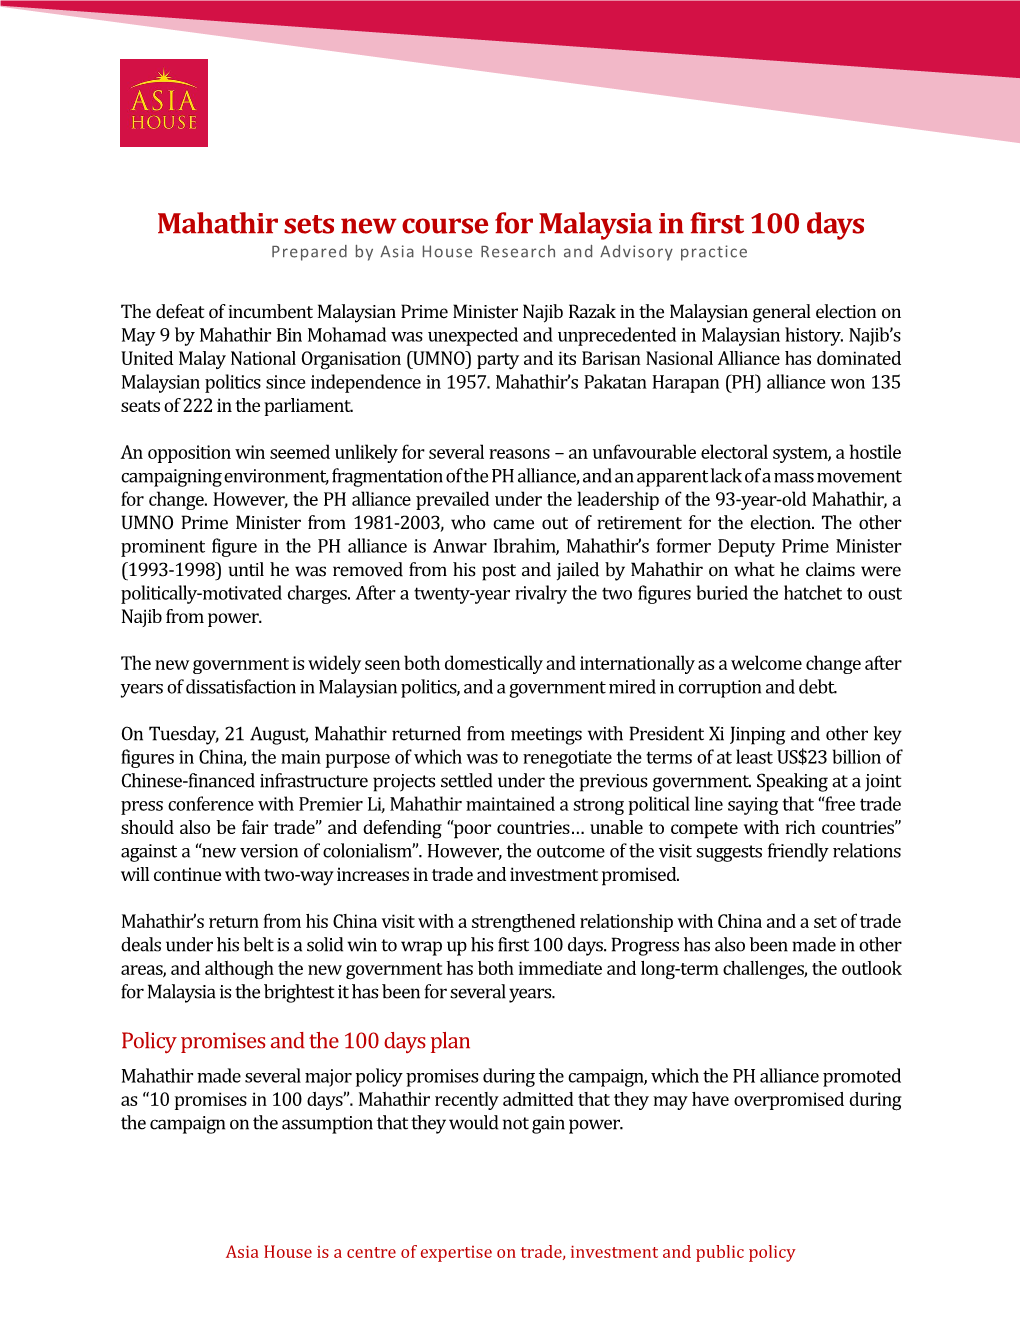 Mahathir Sets New Course for Malaysia in First 100 Days Prepared by Asia House Research and Advisory Practice